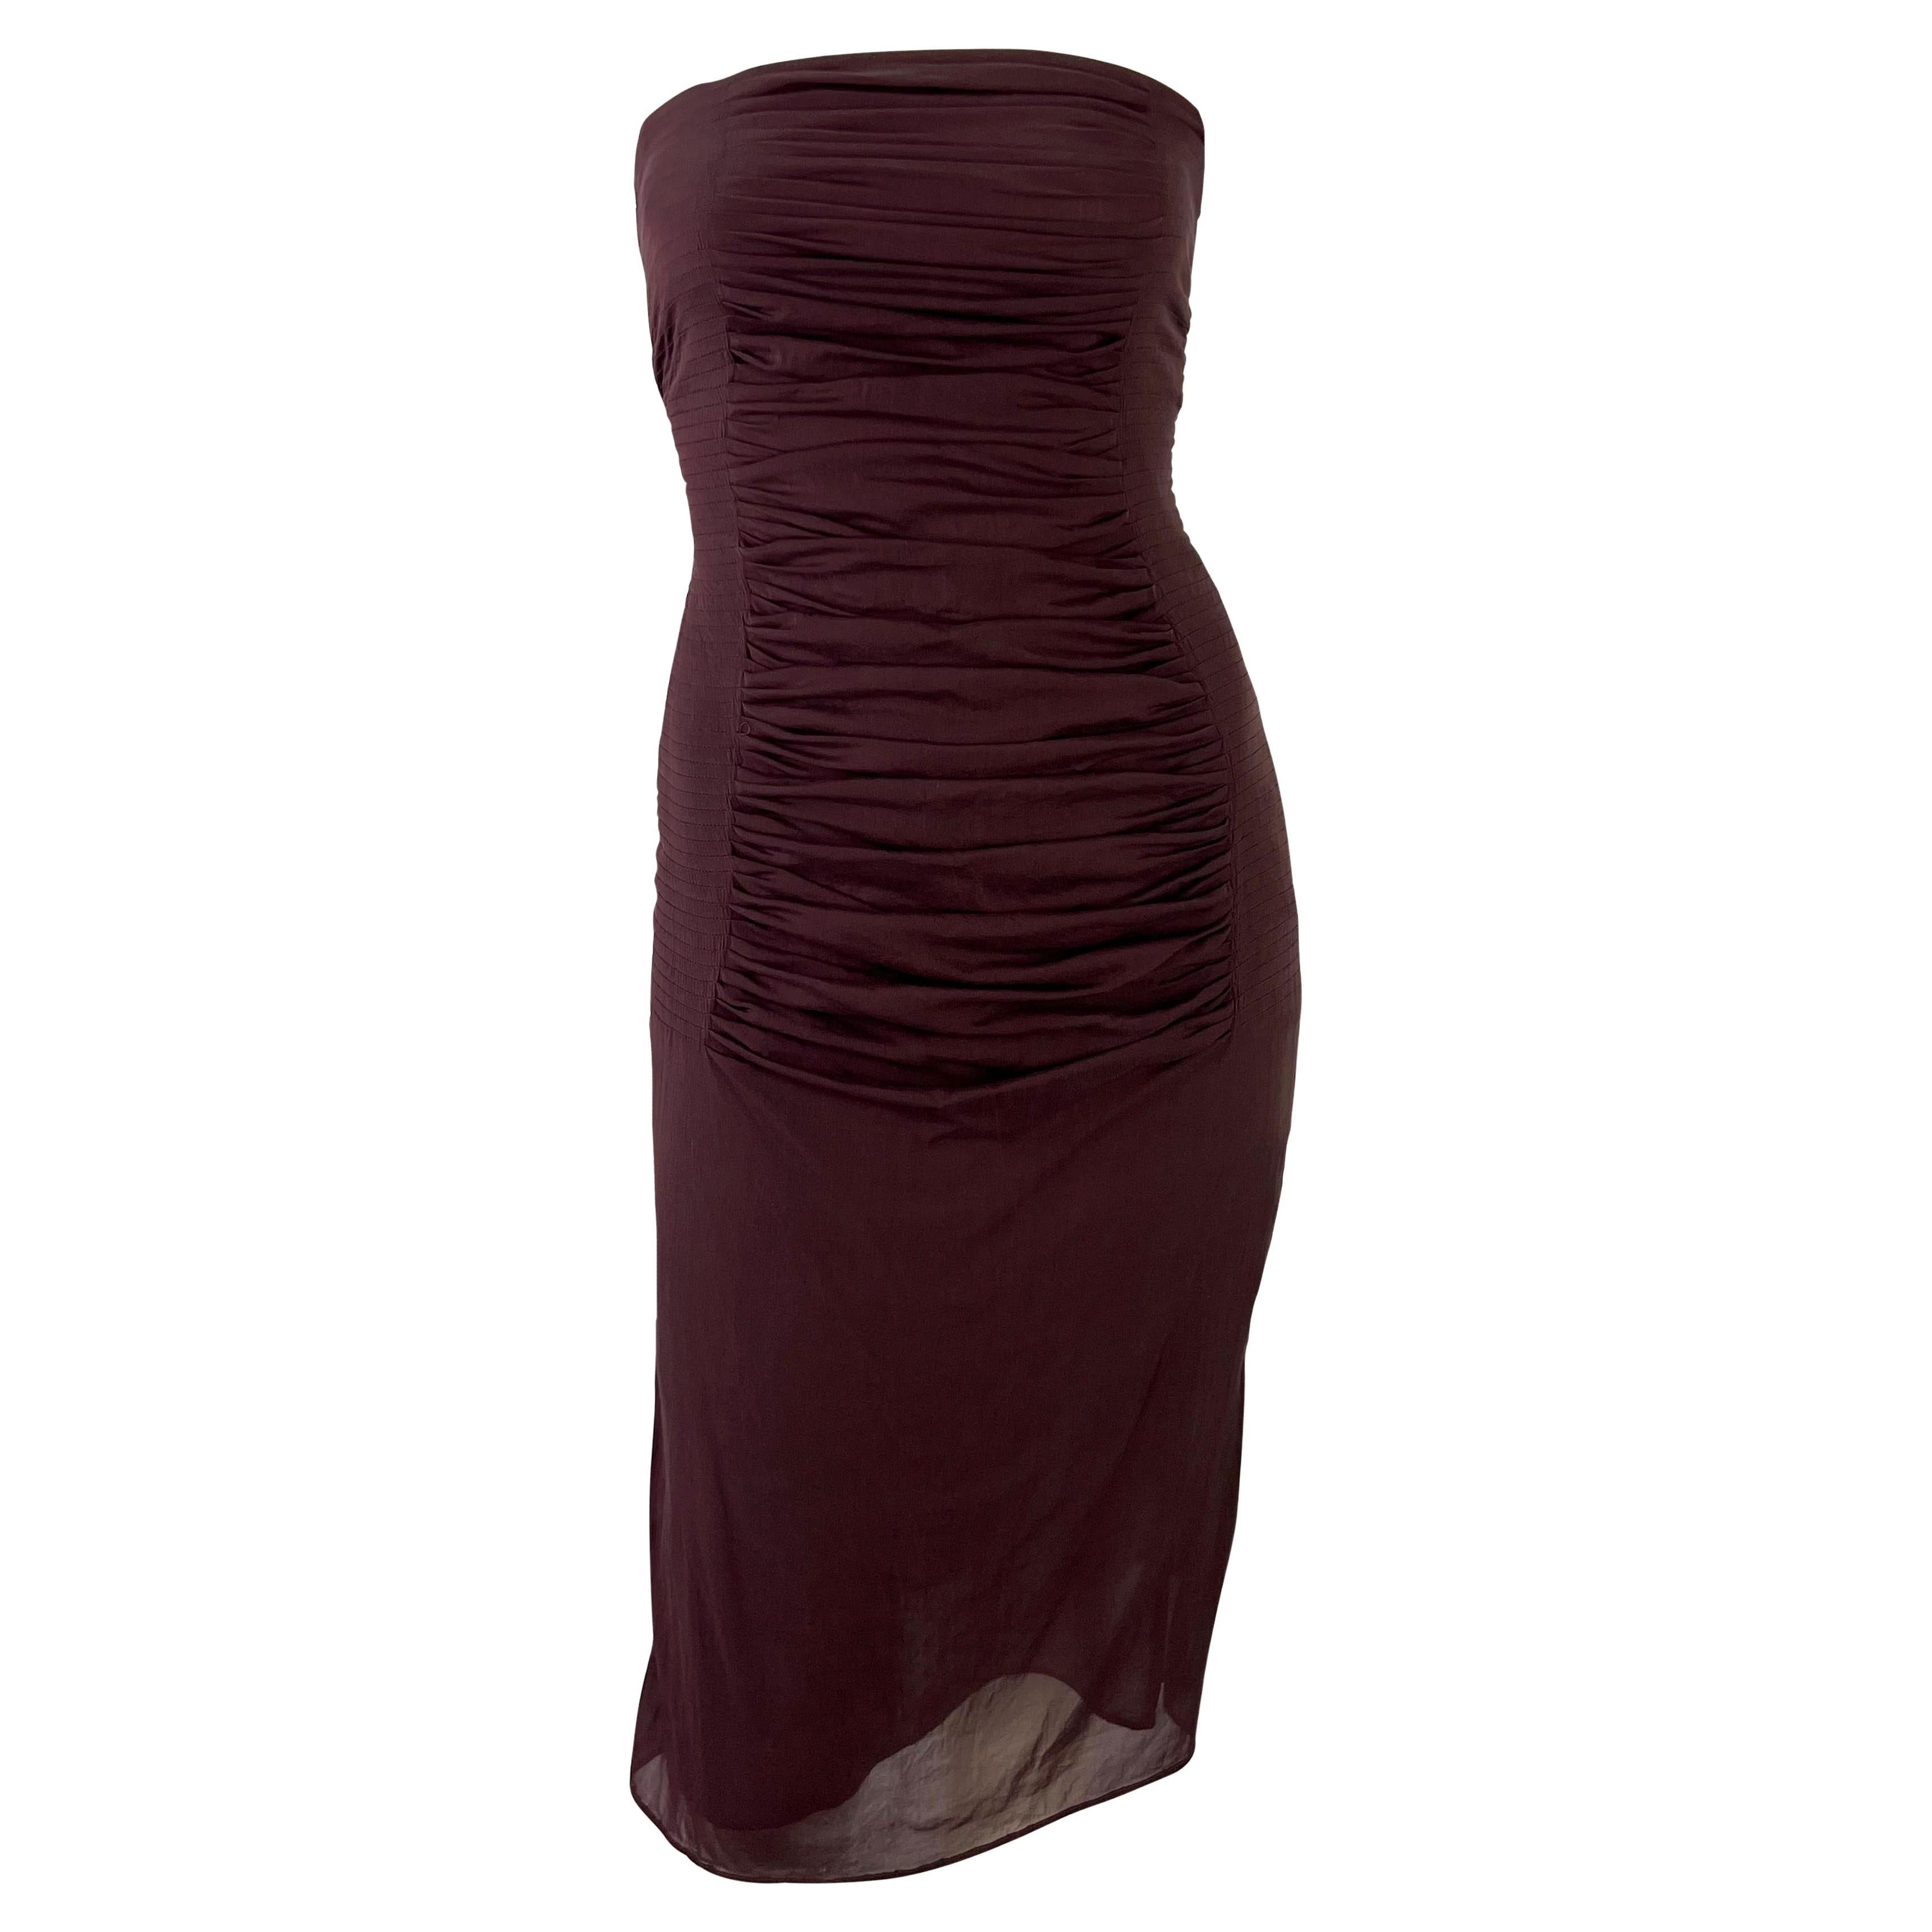 S/S 2001 Yves Saint Laurent by Tom Ford Sheer Maroon Pleat Strapless Mini Dress For Sale